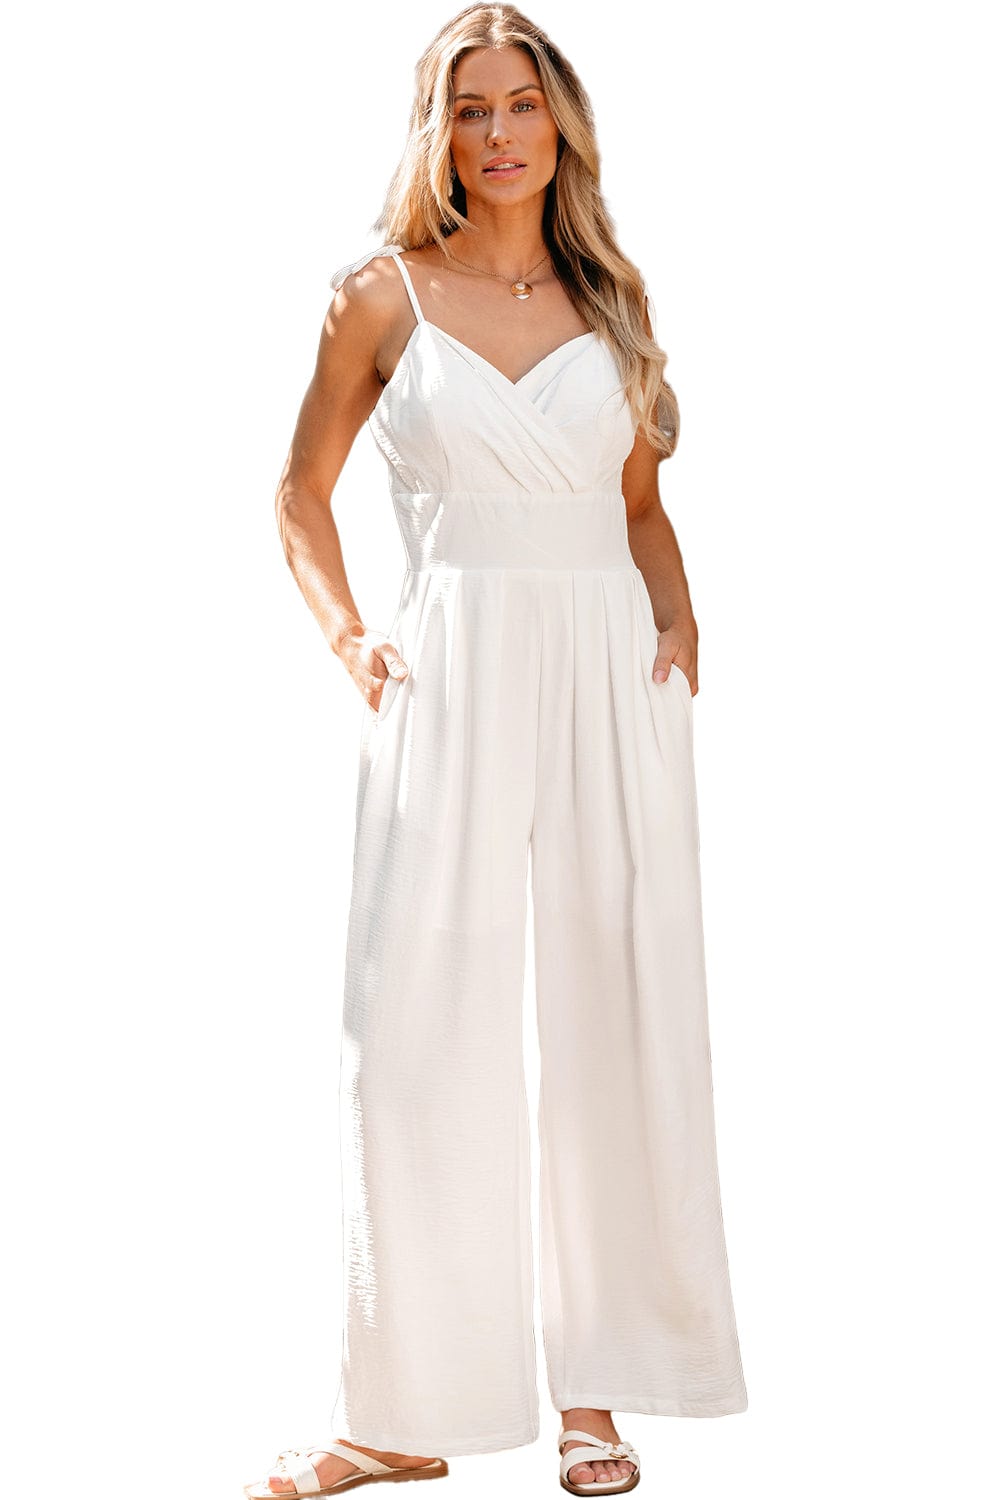 The802Gypsy  Jumpsuits & Rompers TRAVELING GYPSY-Beige Spaghetti Straps Wide Leg Jumpsuit